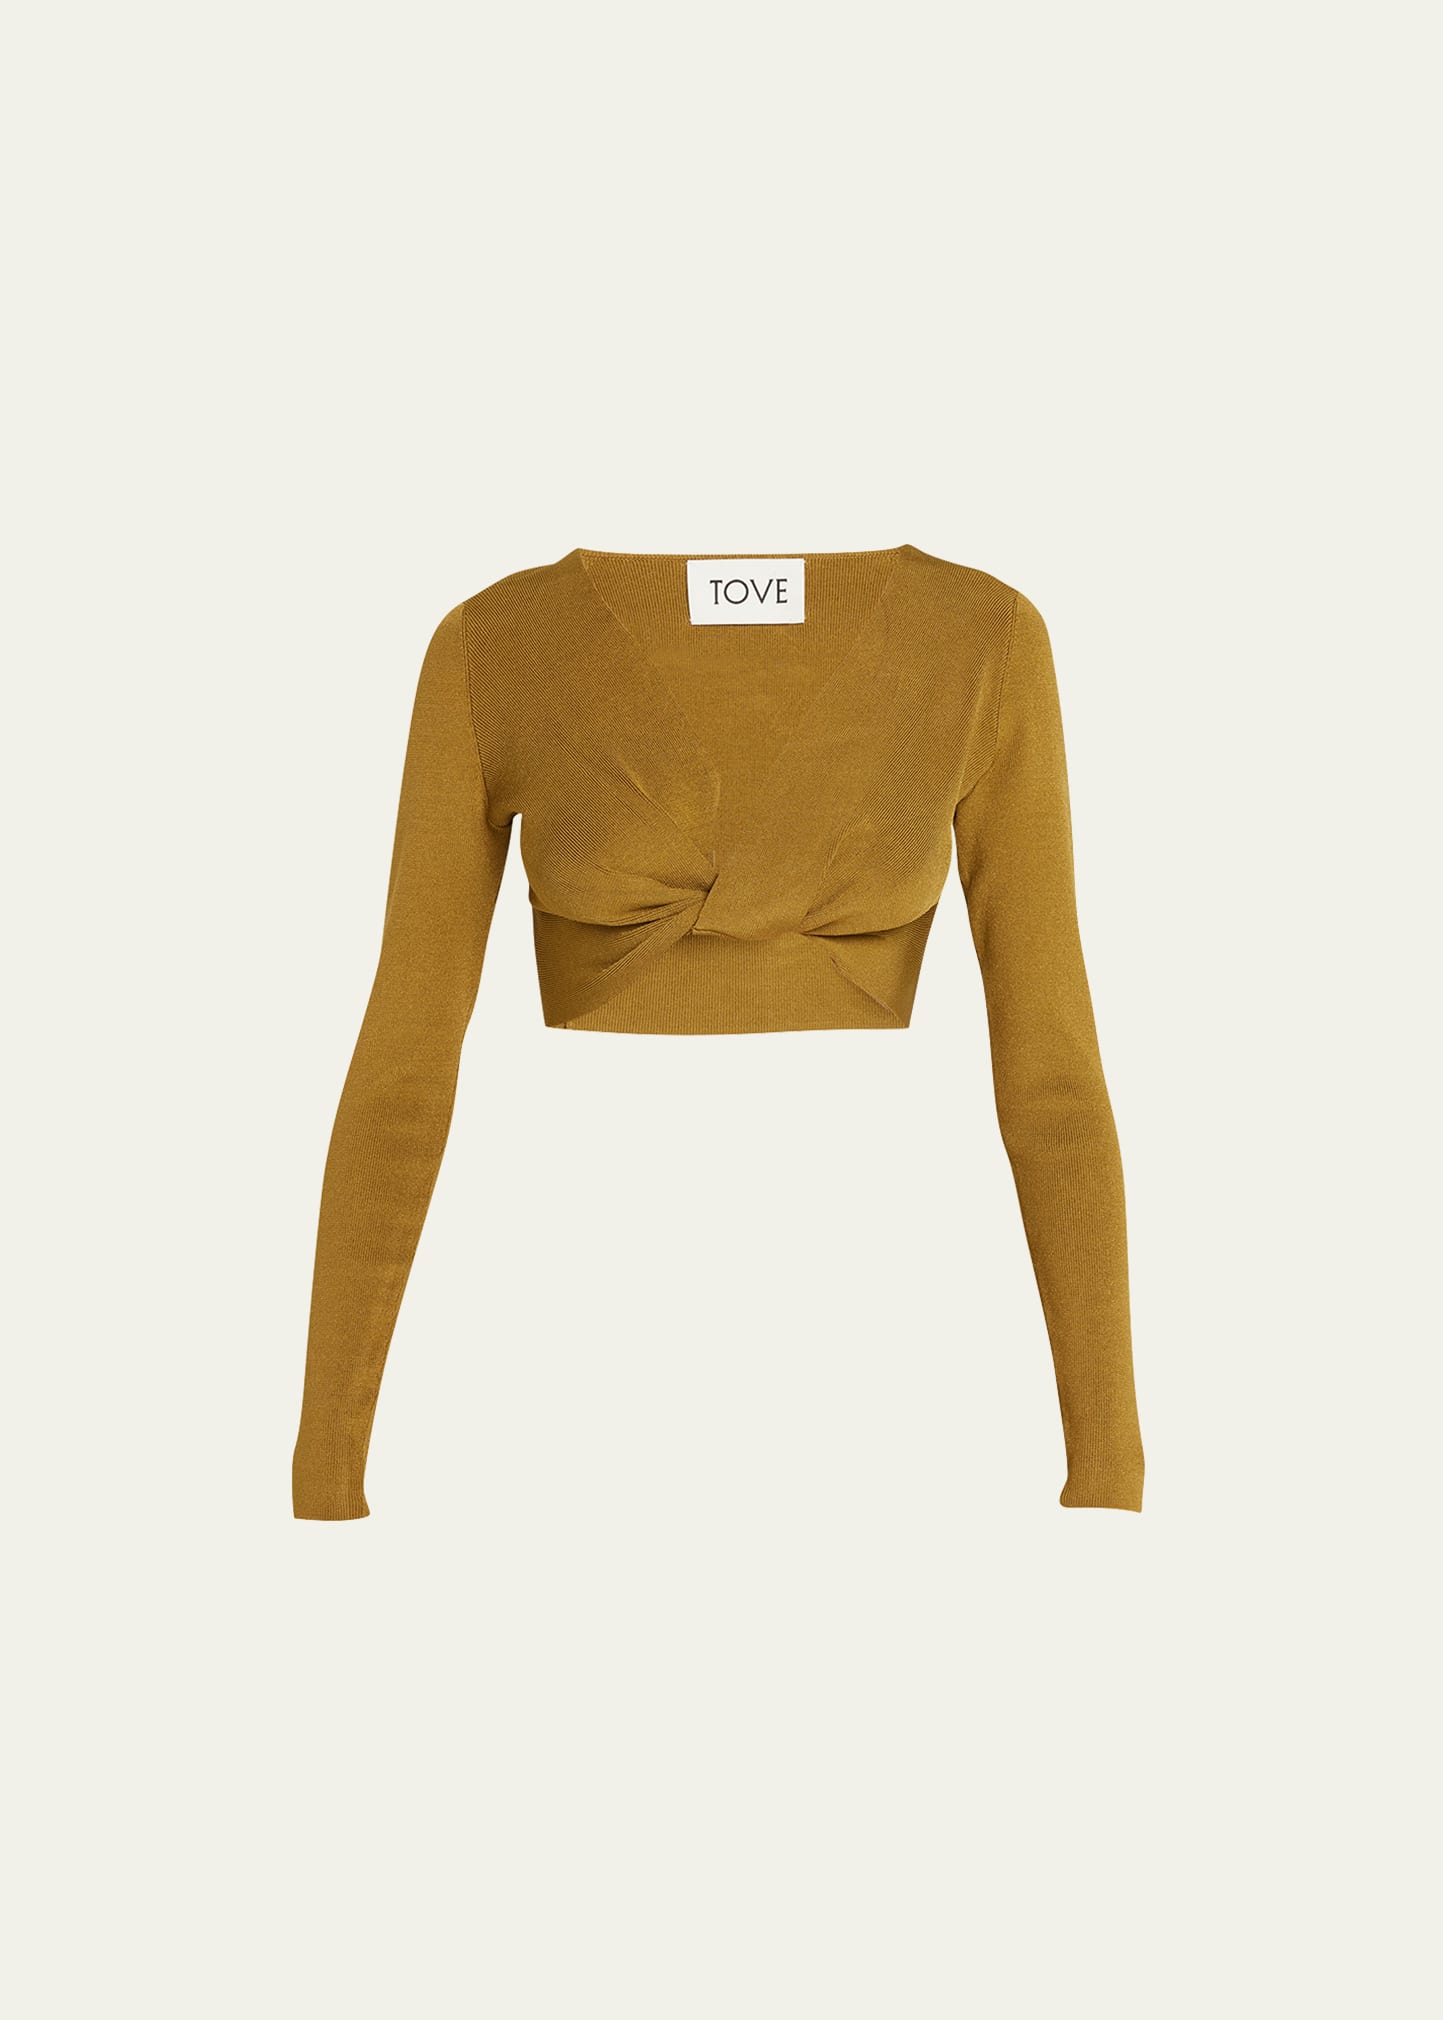 Tove Grace Long Sleeve Twist Front Top